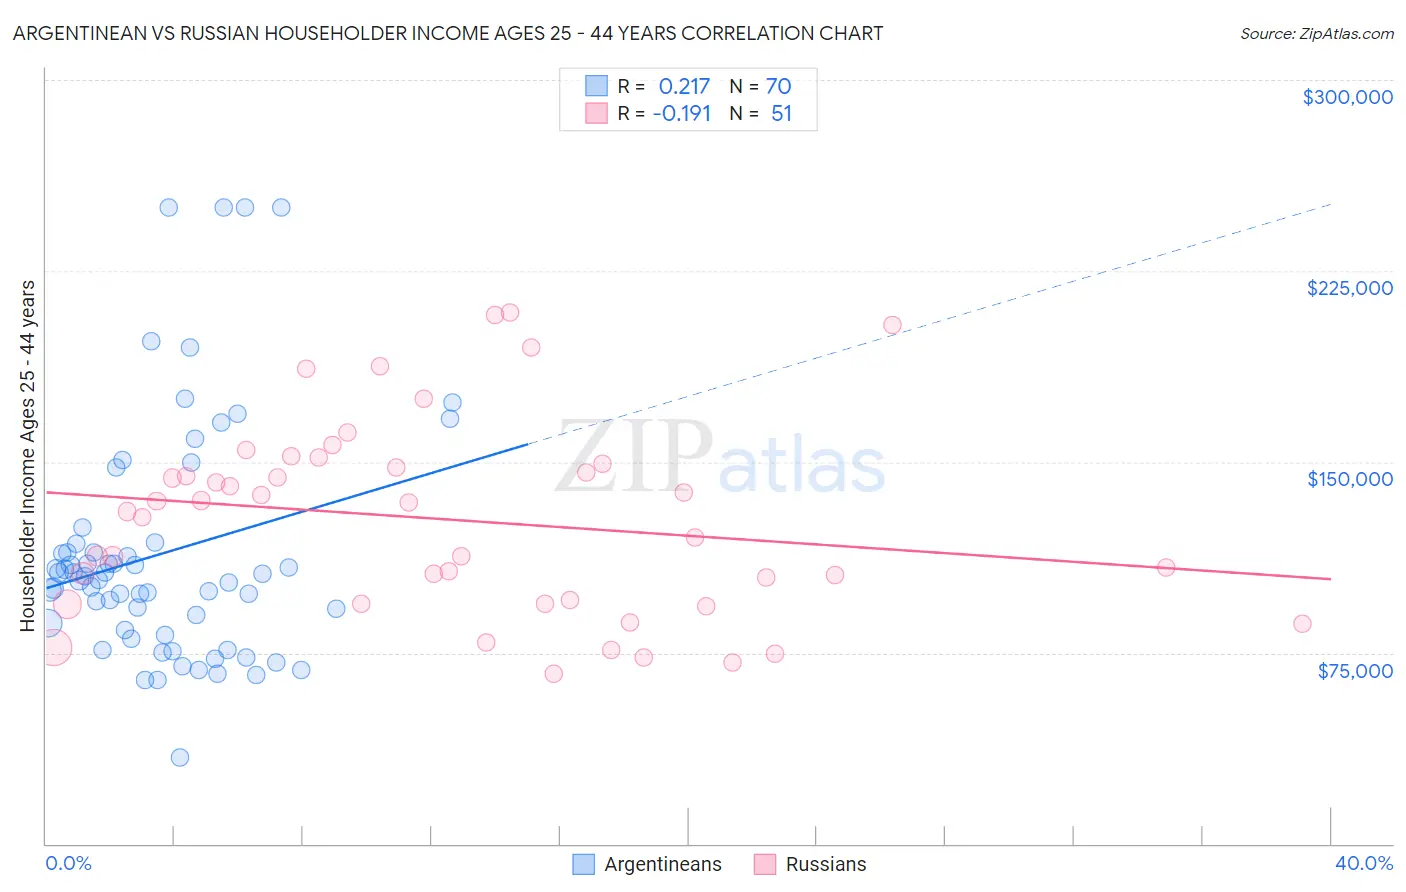 Argentinean vs Russian Householder Income Ages 25 - 44 years